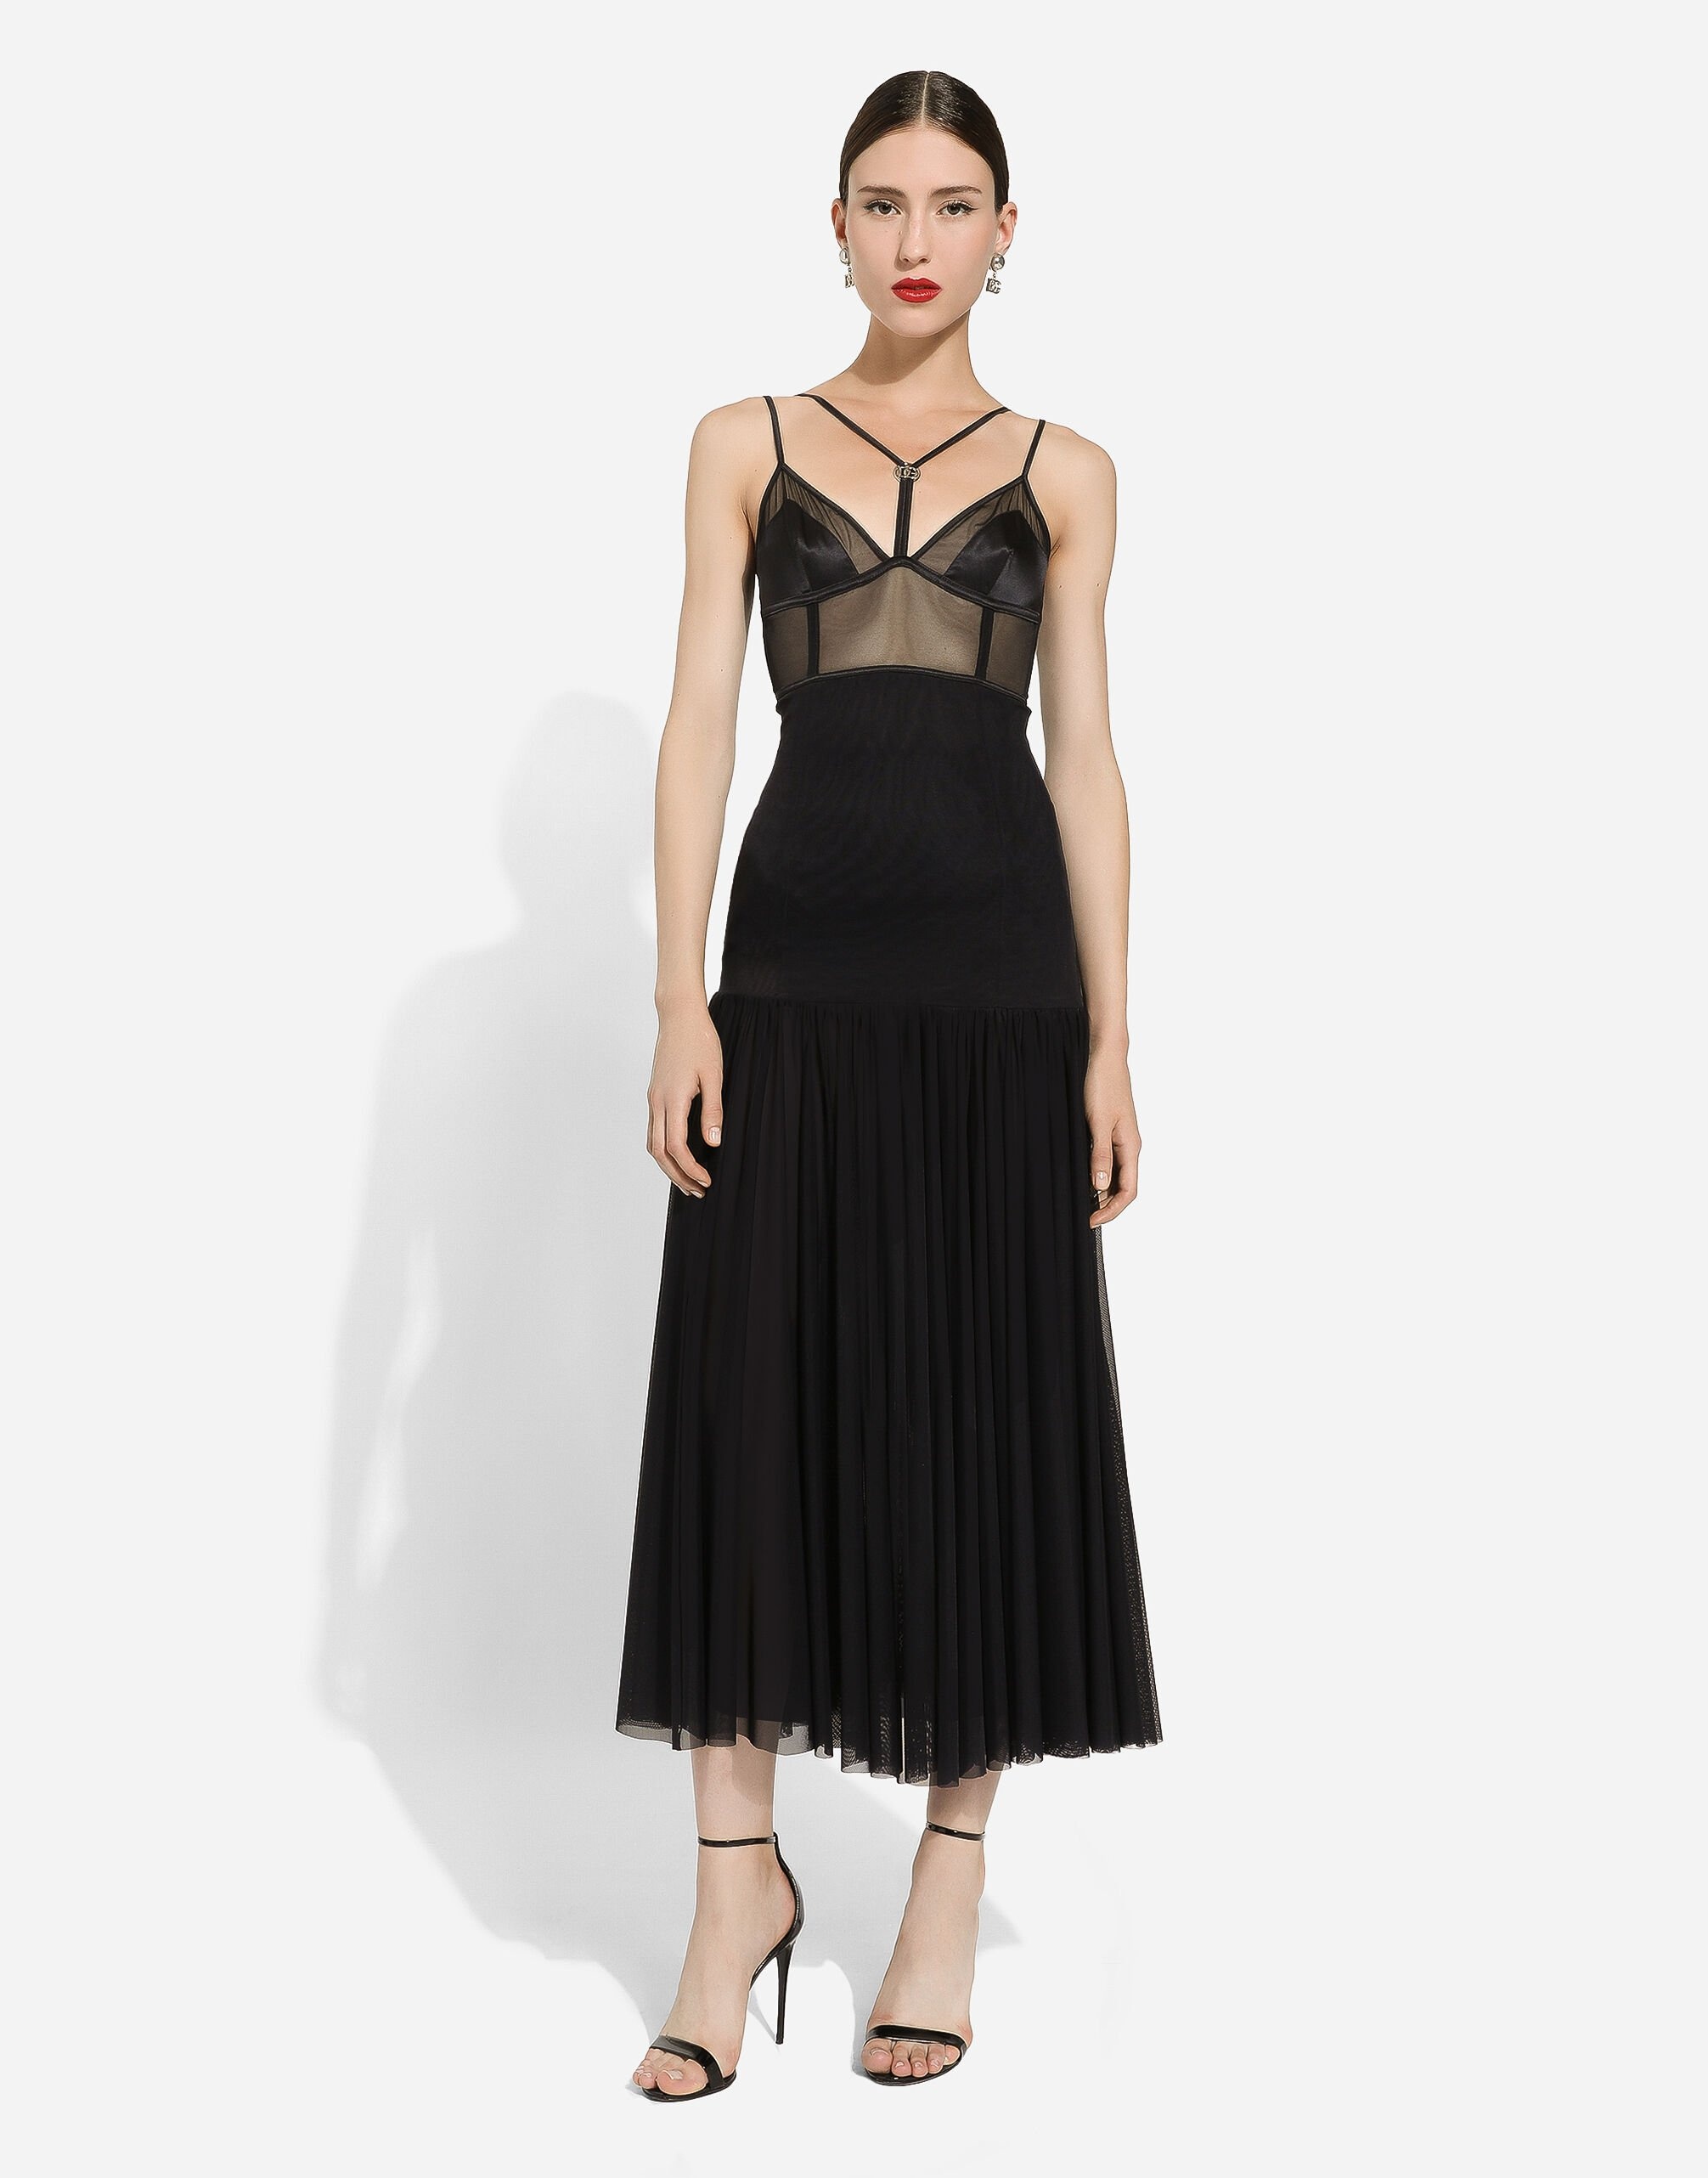 Tulle midi dress with lingerie details and the DG logo - 2